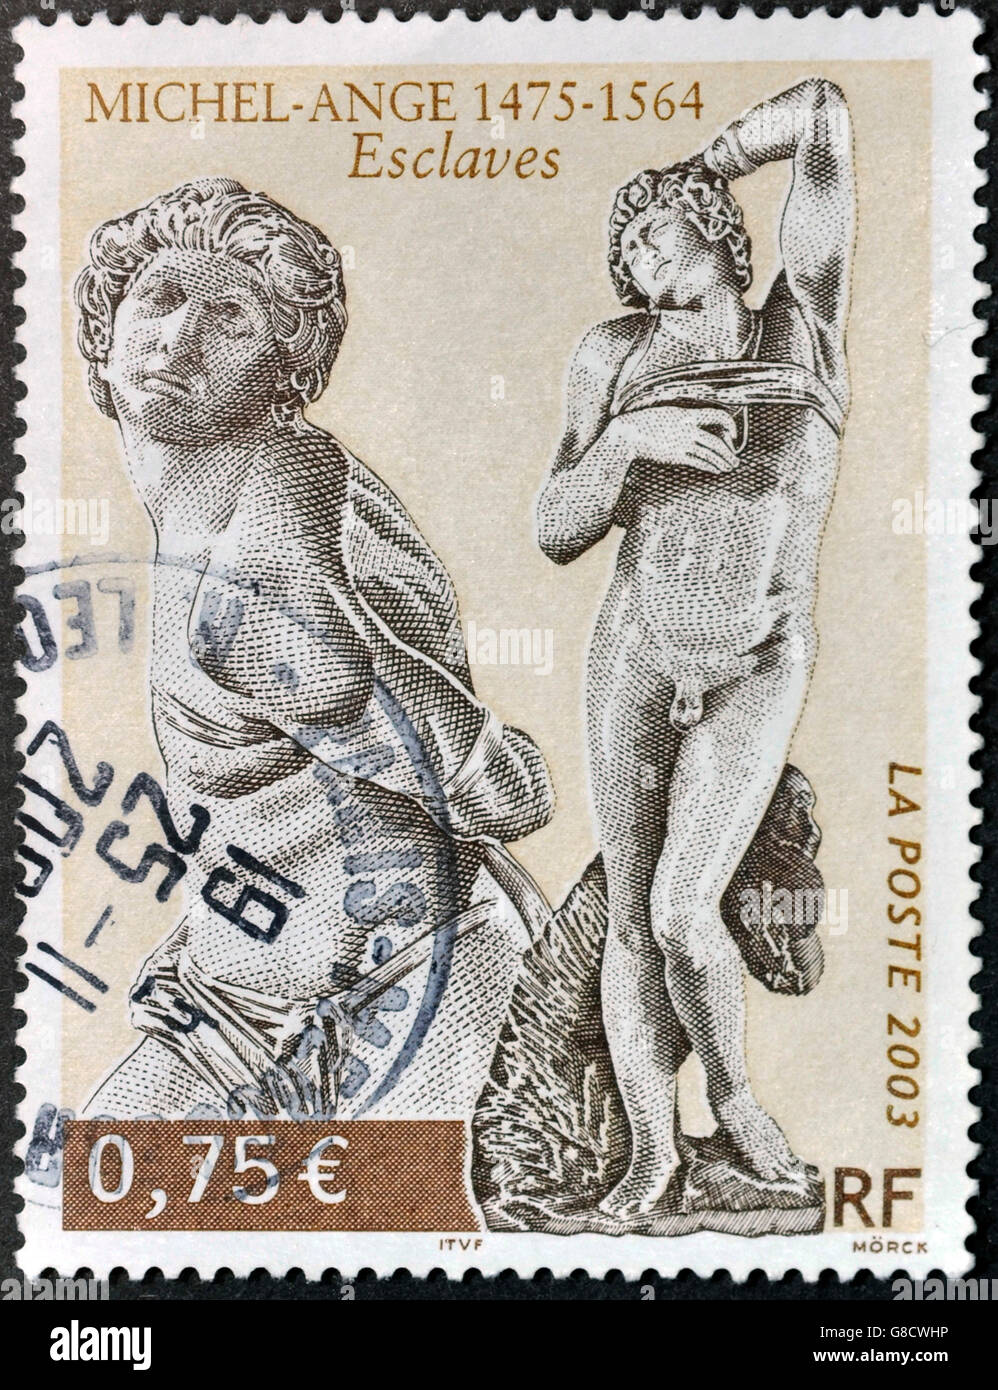 FRANCE - CIRCA 2003: A stamp printed in France shows Slaves sculptures by Michelangelo, circa 2003 Stock Photo